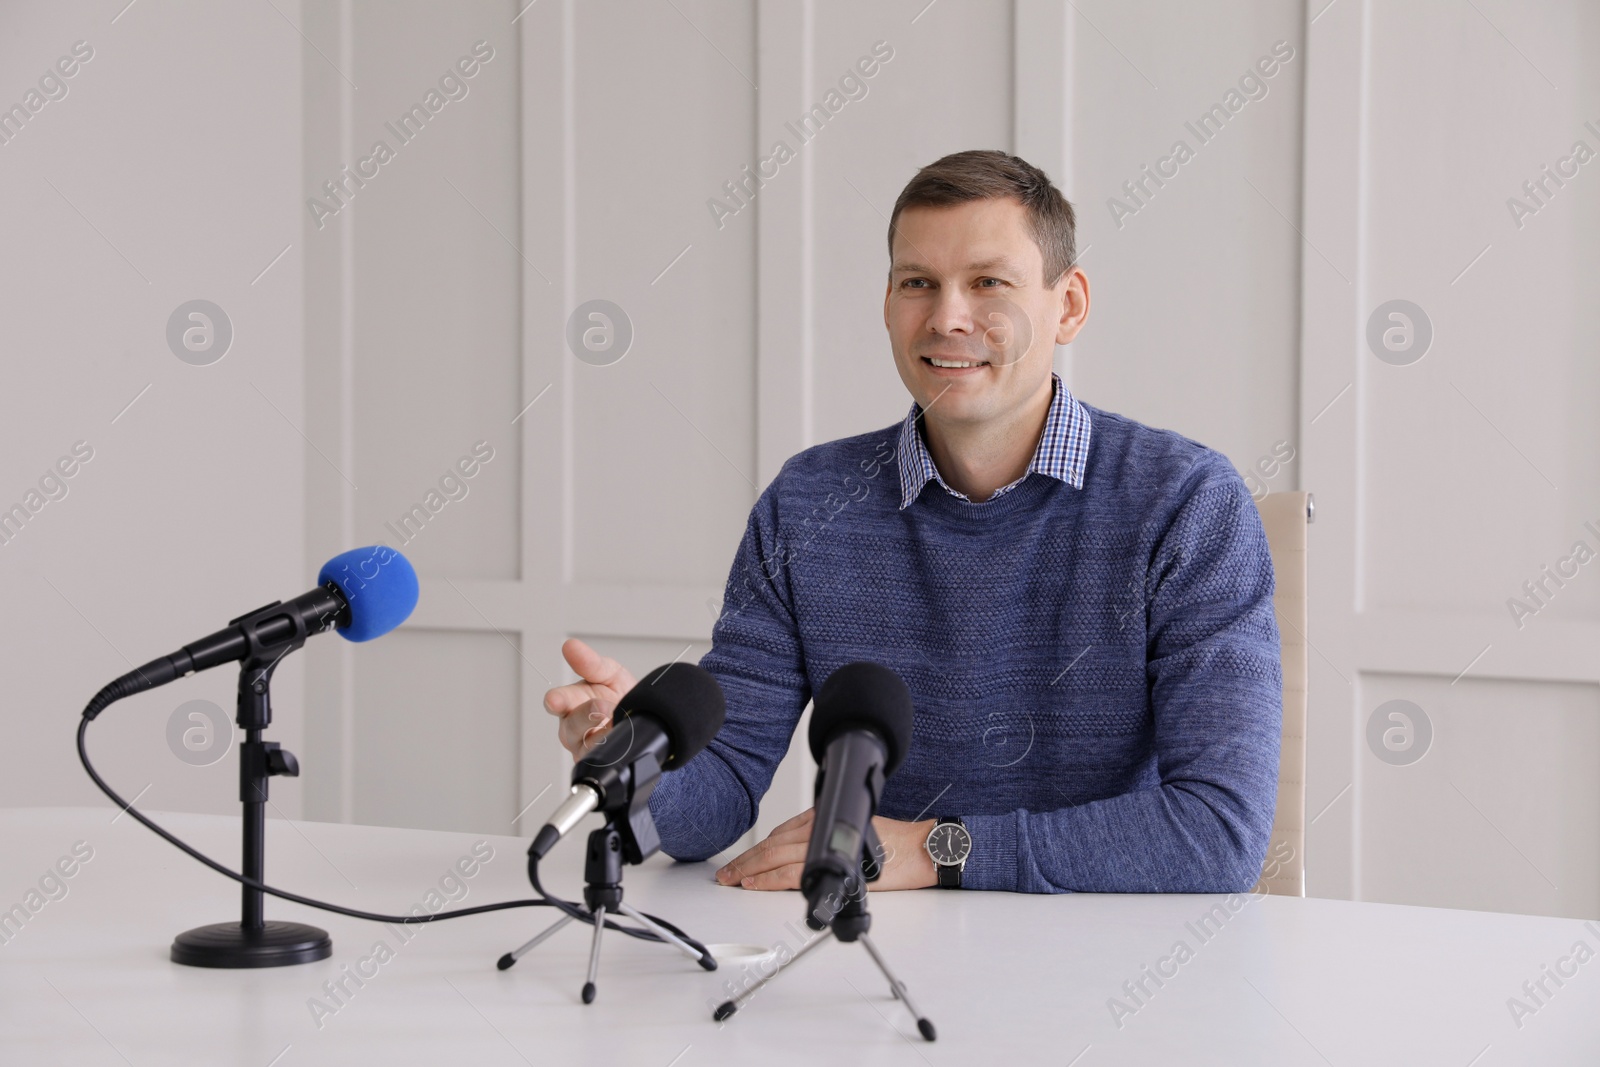 Photo of Business man giving interview at official event